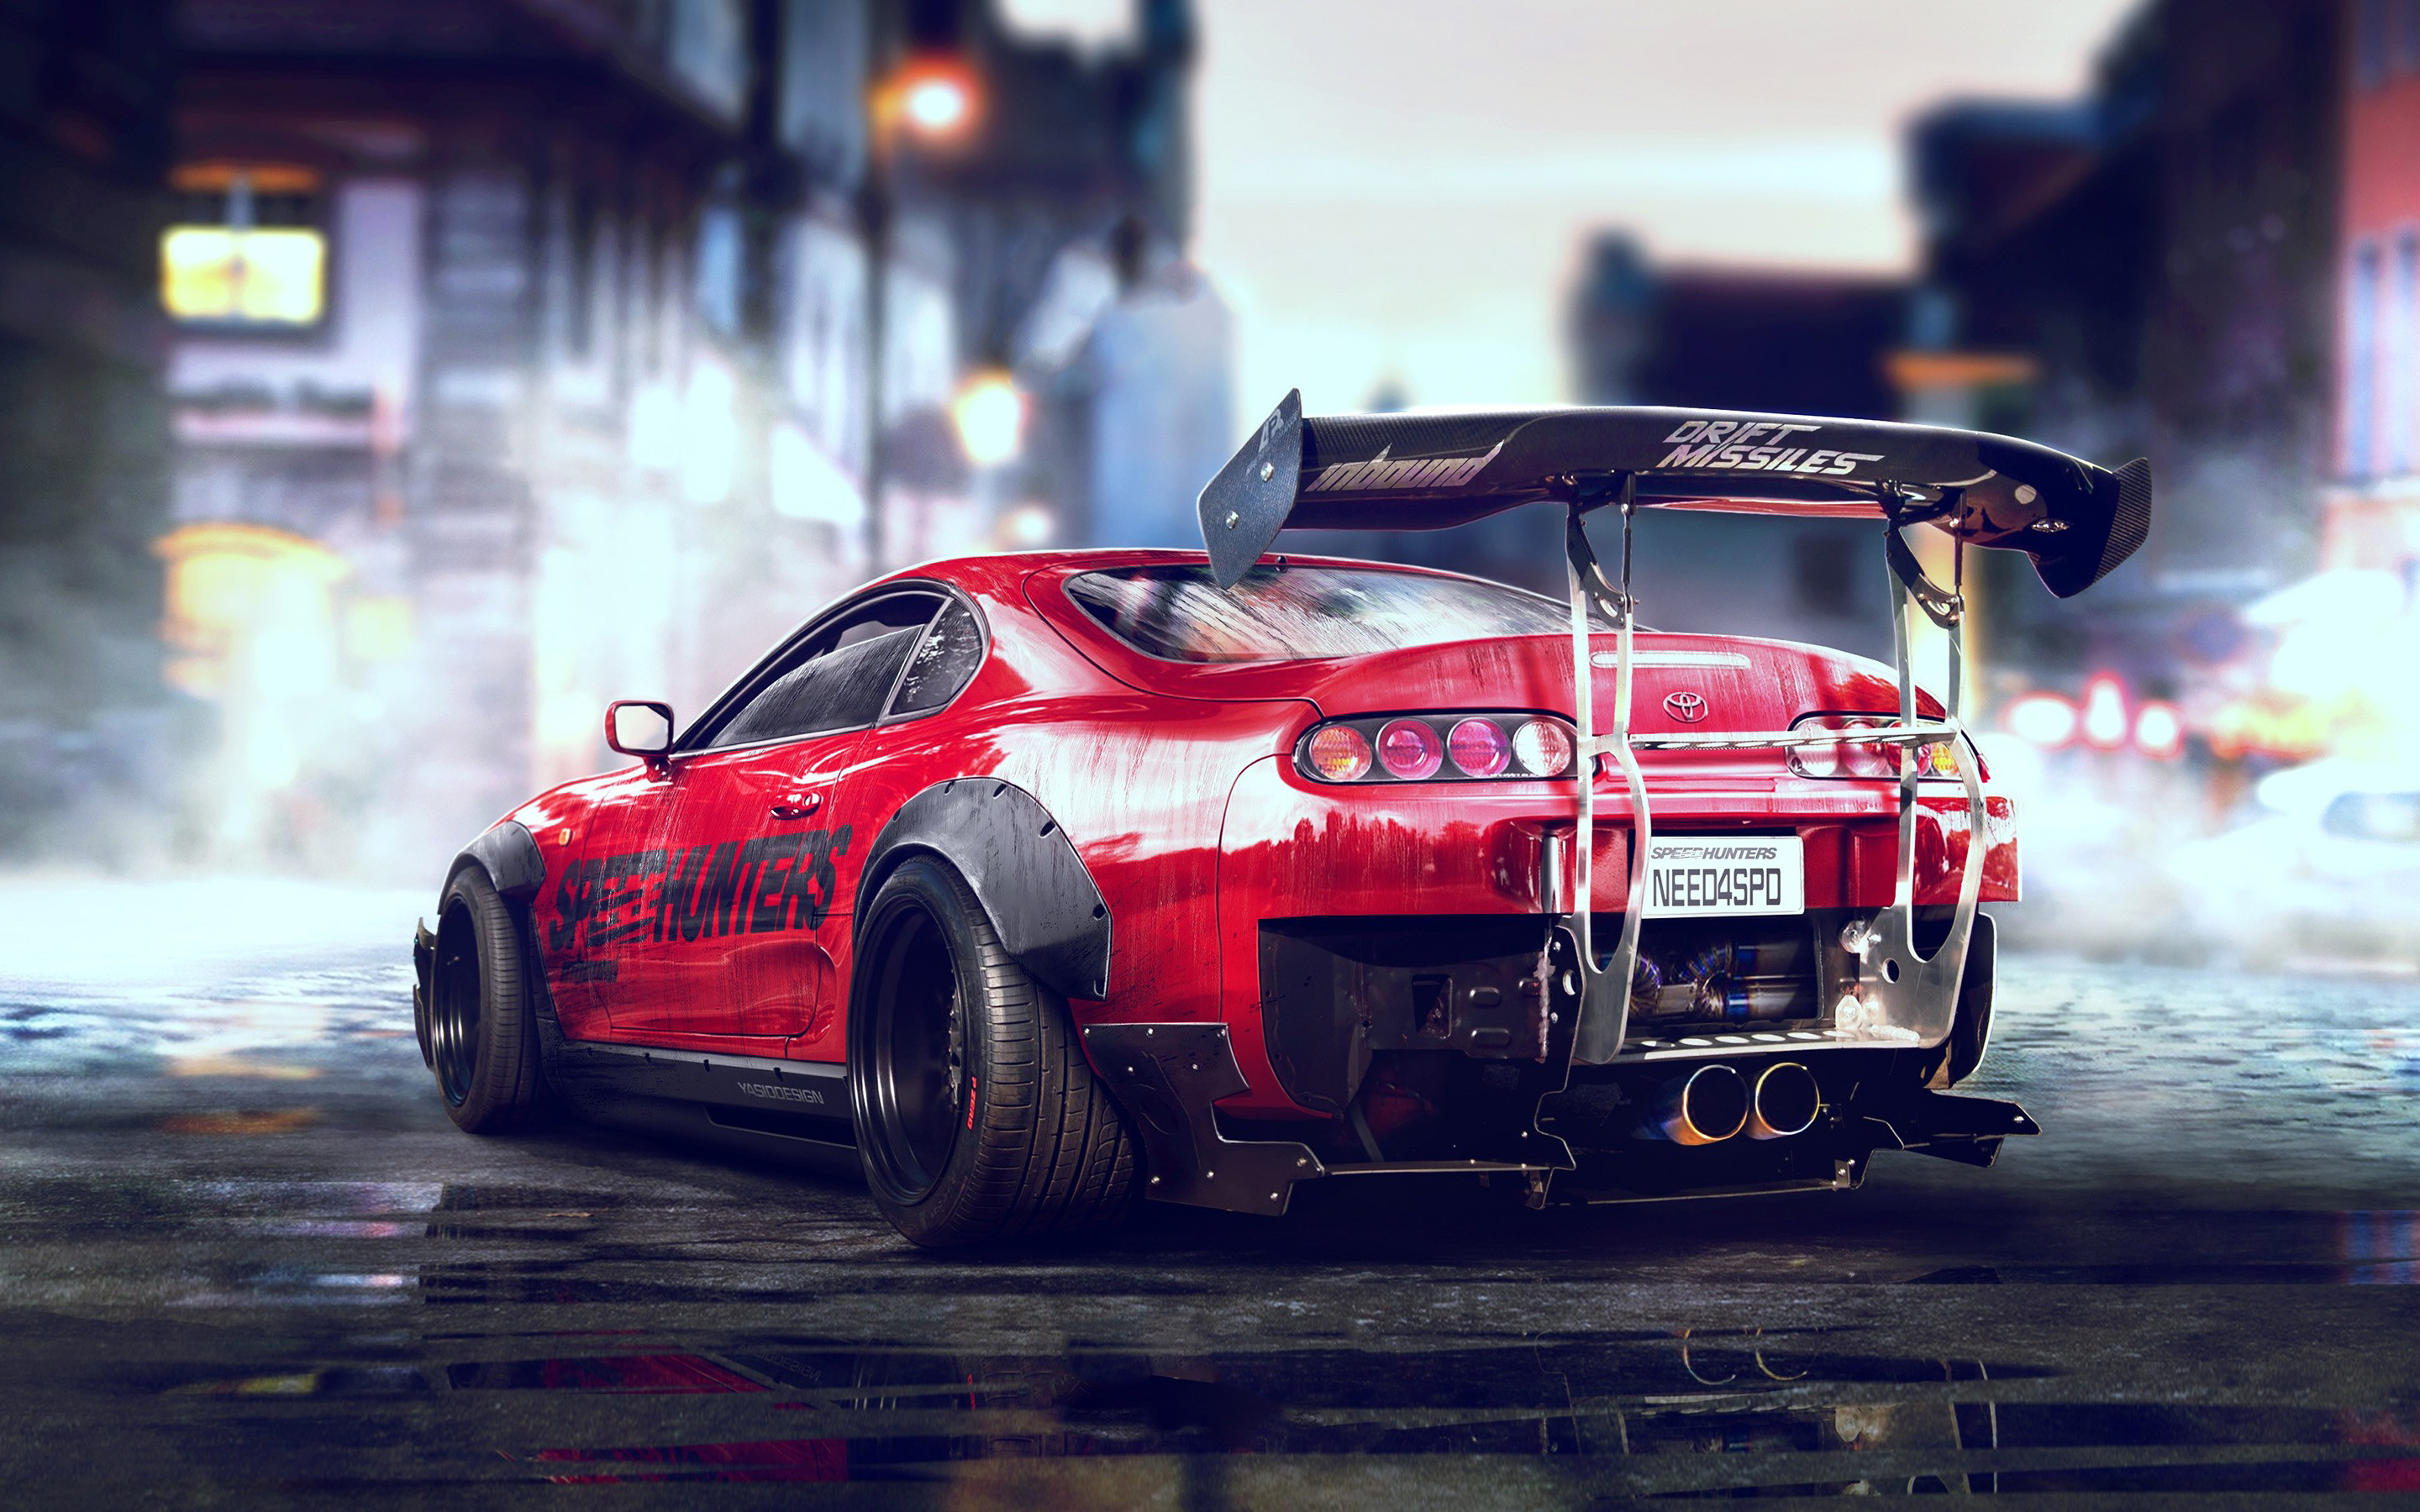 Toyota Supra, Need For Speed Payback, video game, 2880x1800 wallpaper